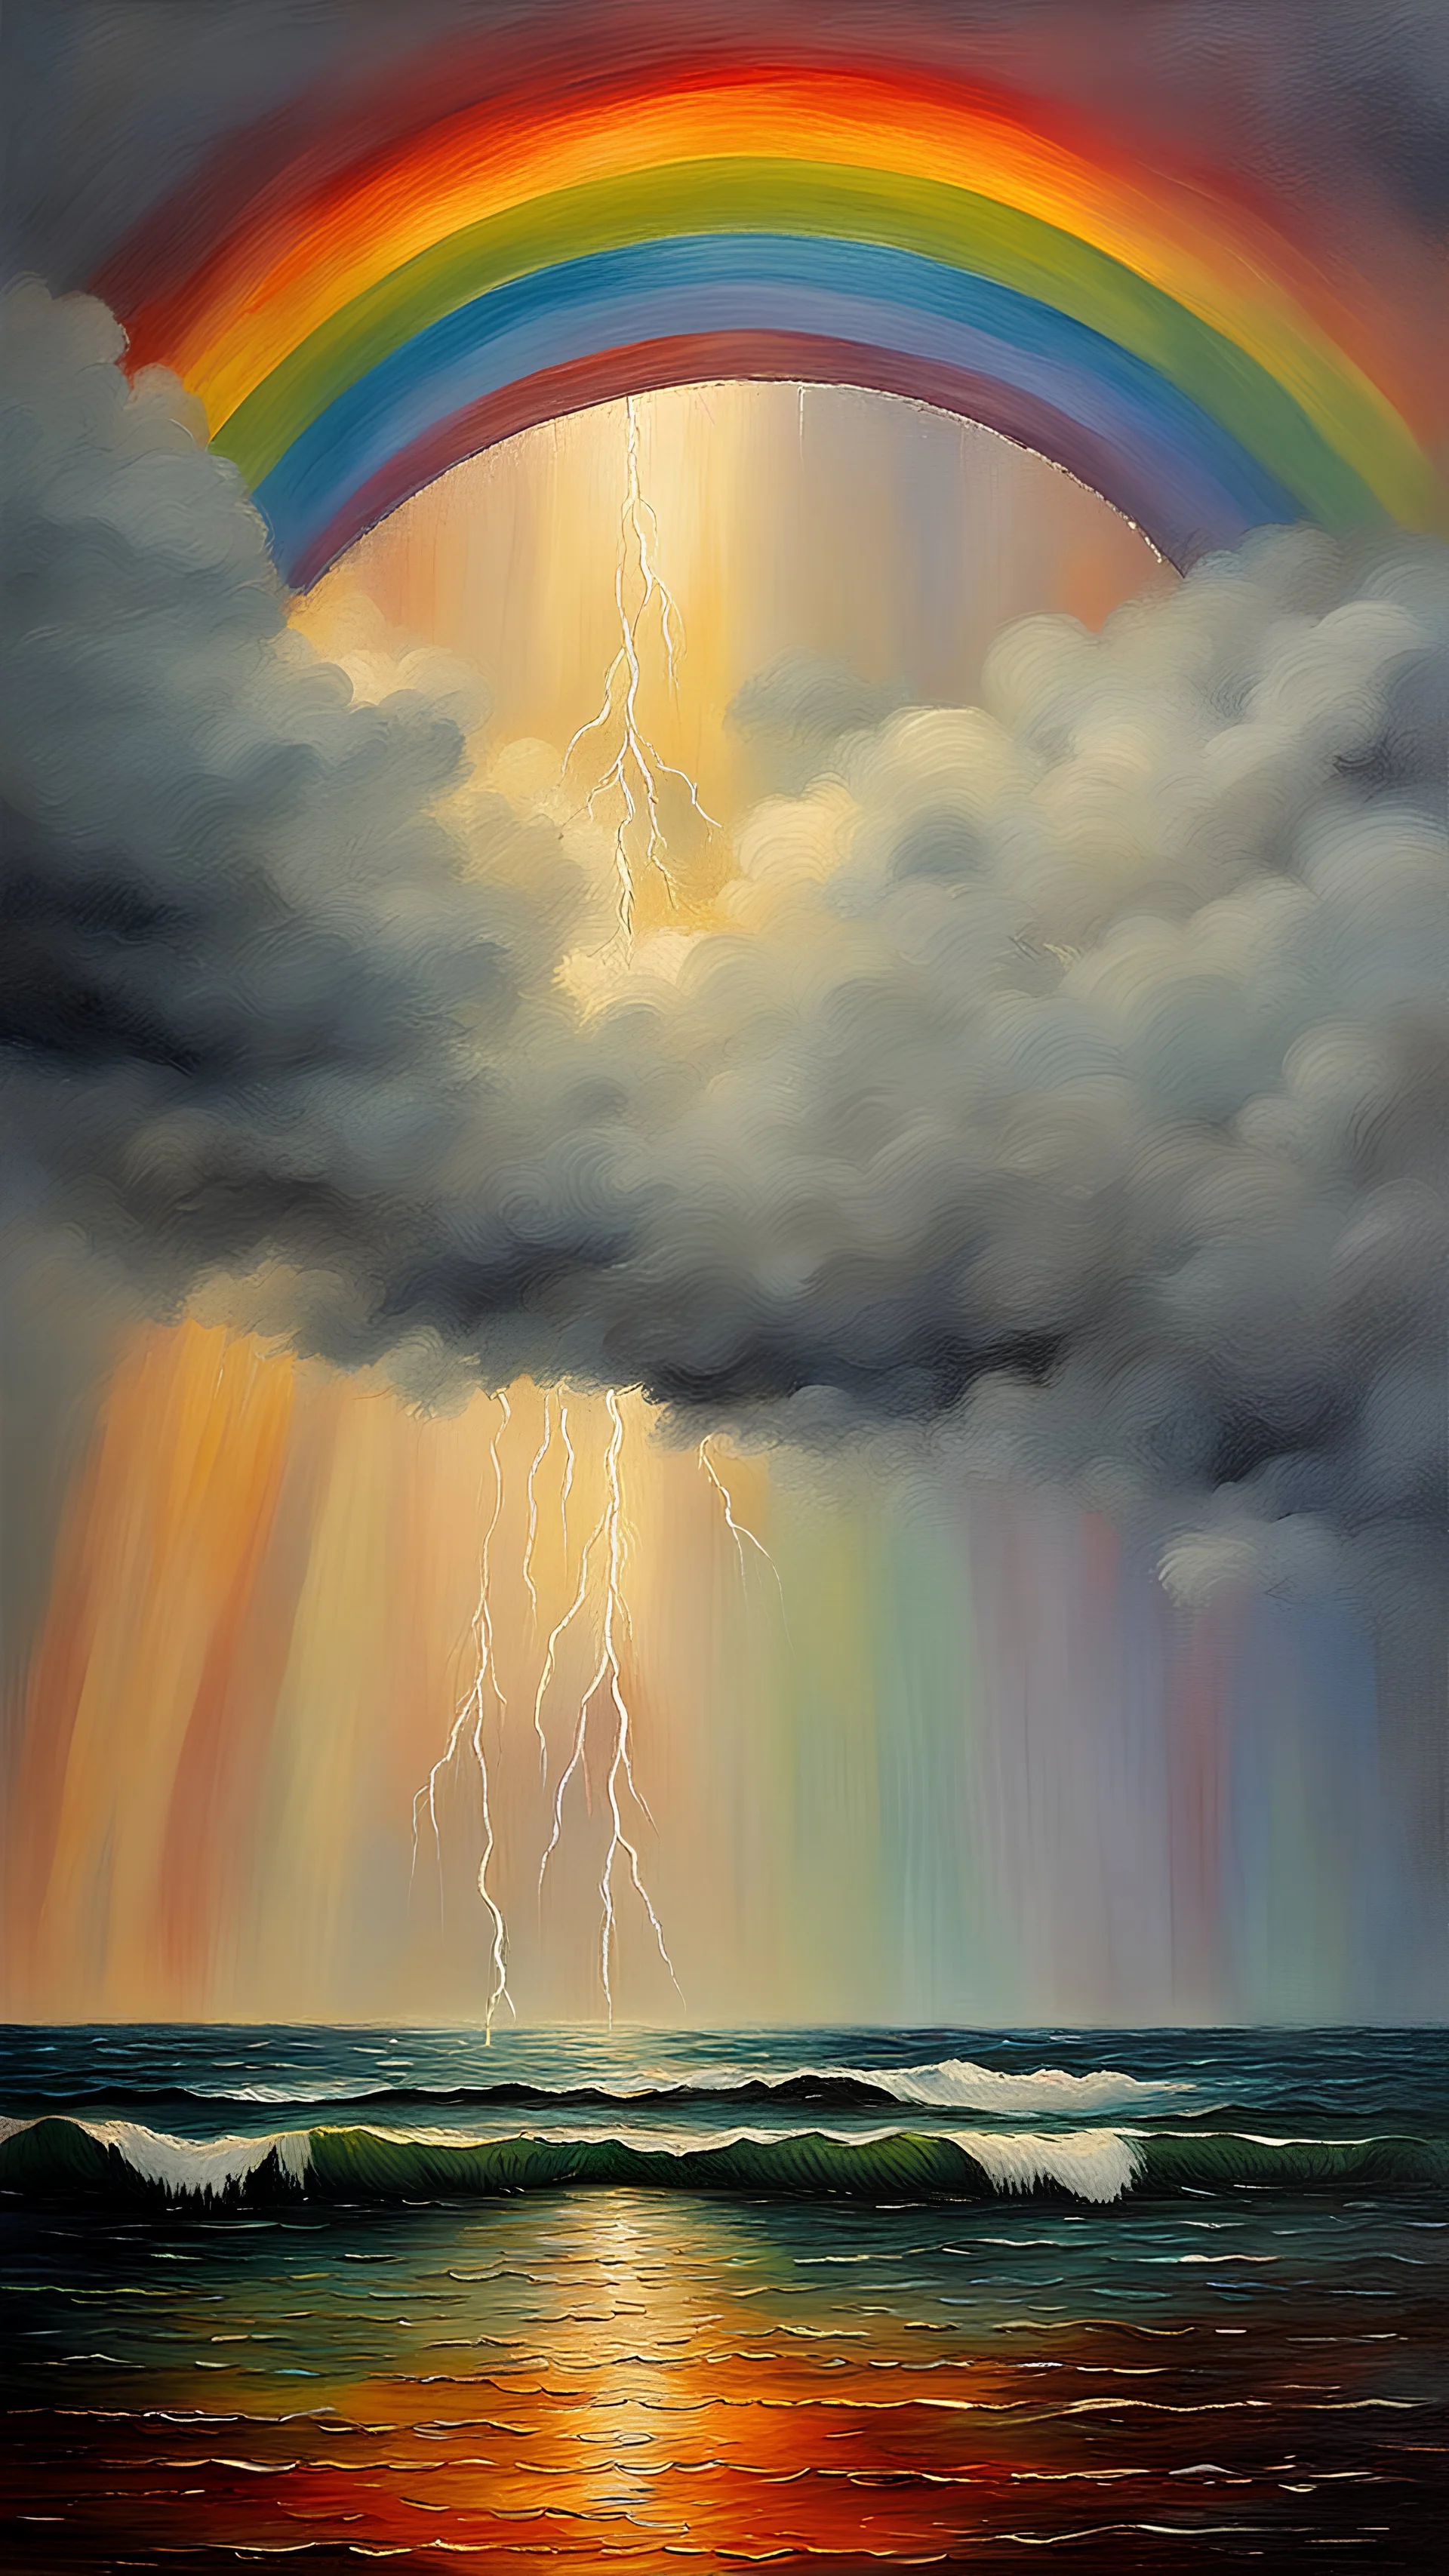 impressionism-style oil painting of a rain thunderstorm in an ocean with a rainbow